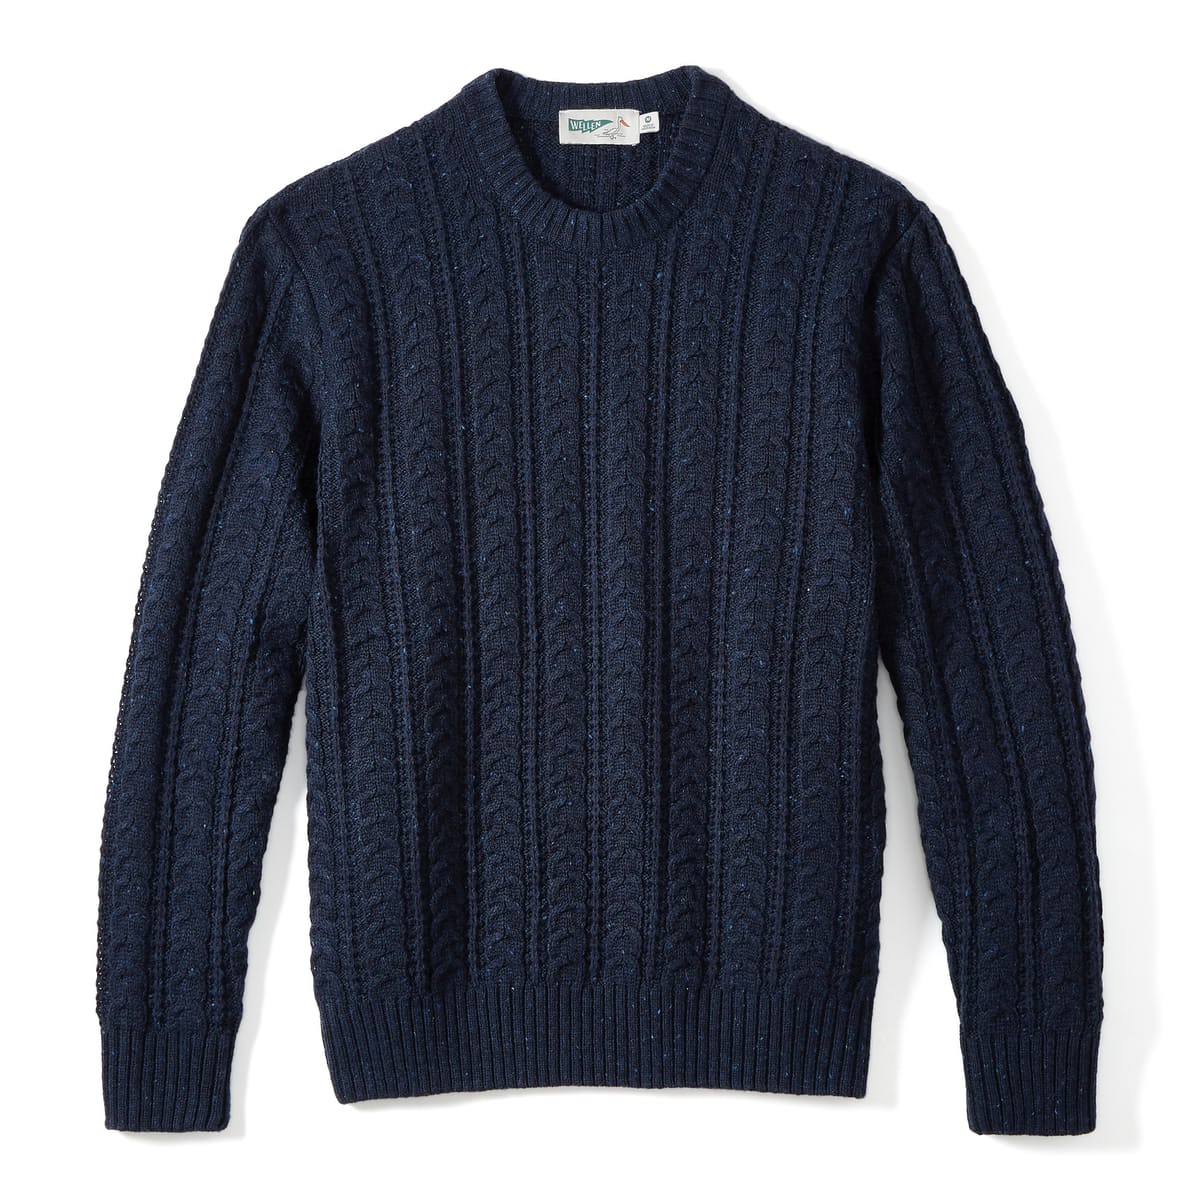 The Seawool Sweater From Wellen Is Made From Upcycled Oyster Shells ...